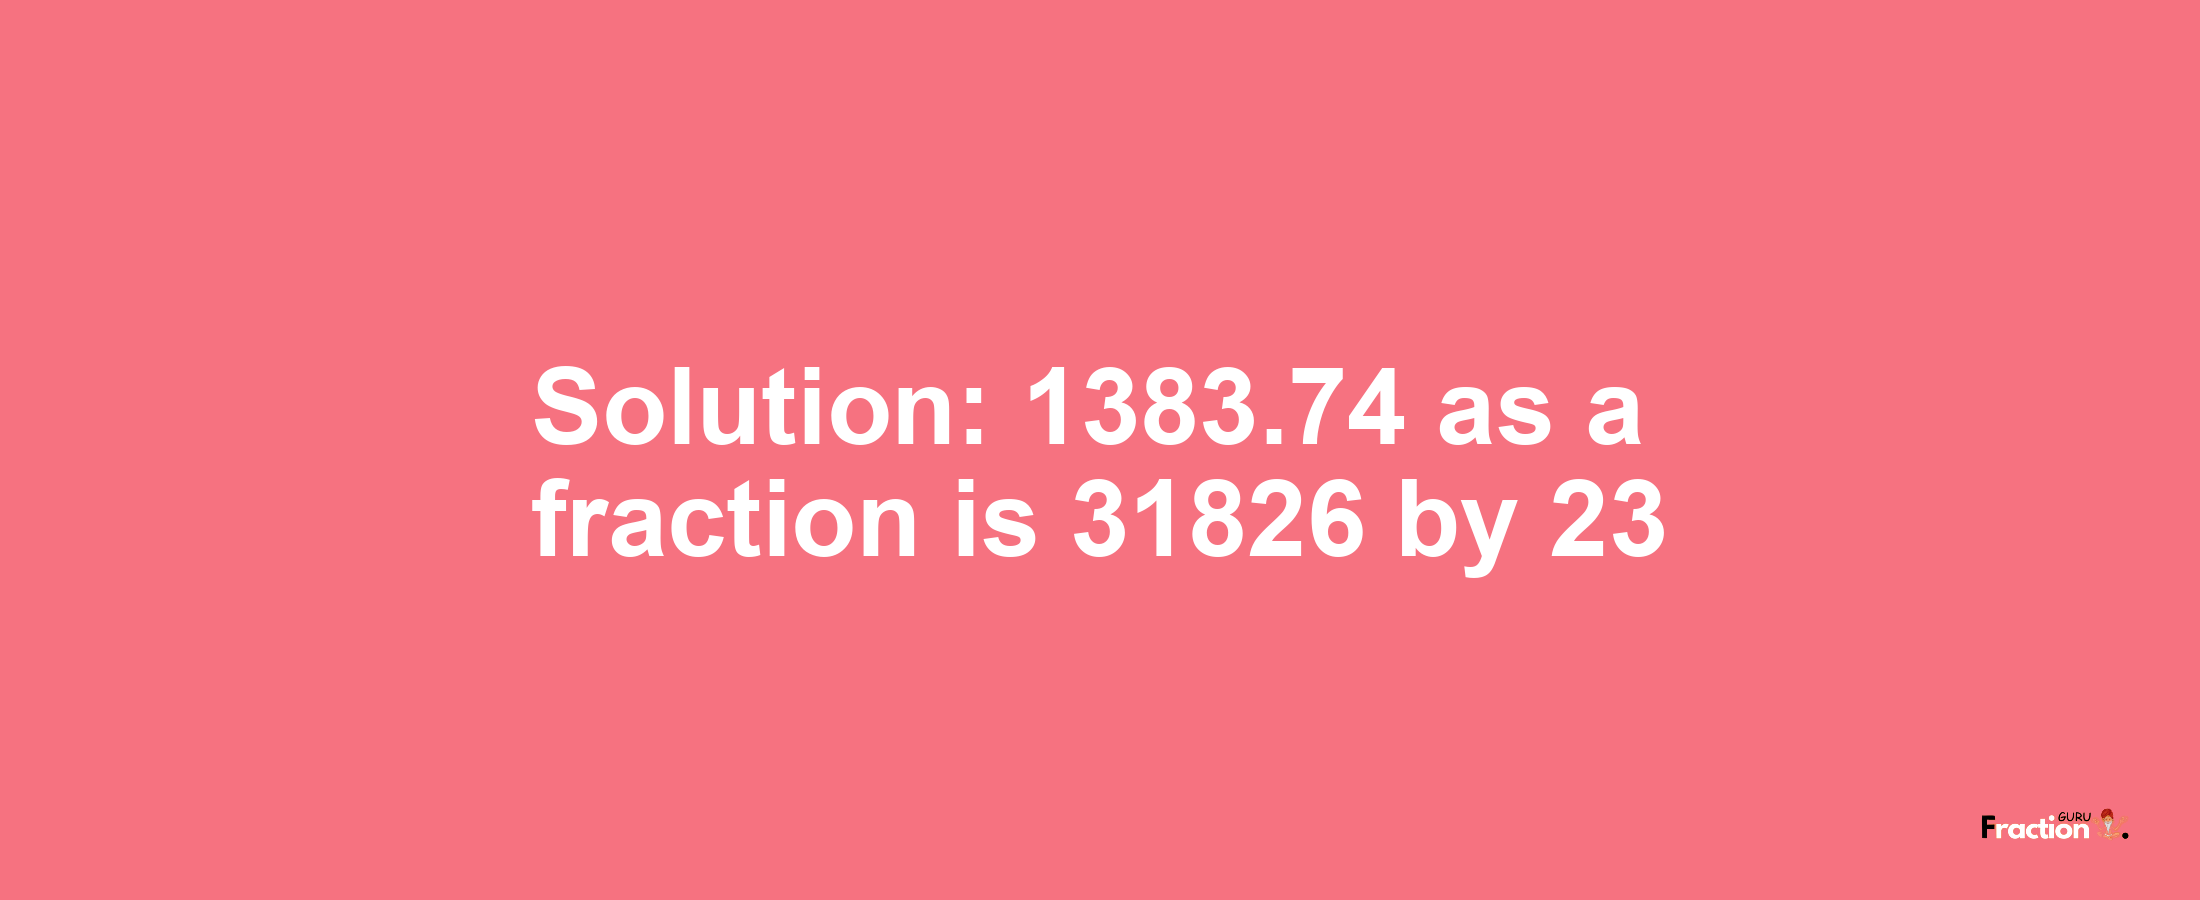 Solution:1383.74 as a fraction is 31826/23